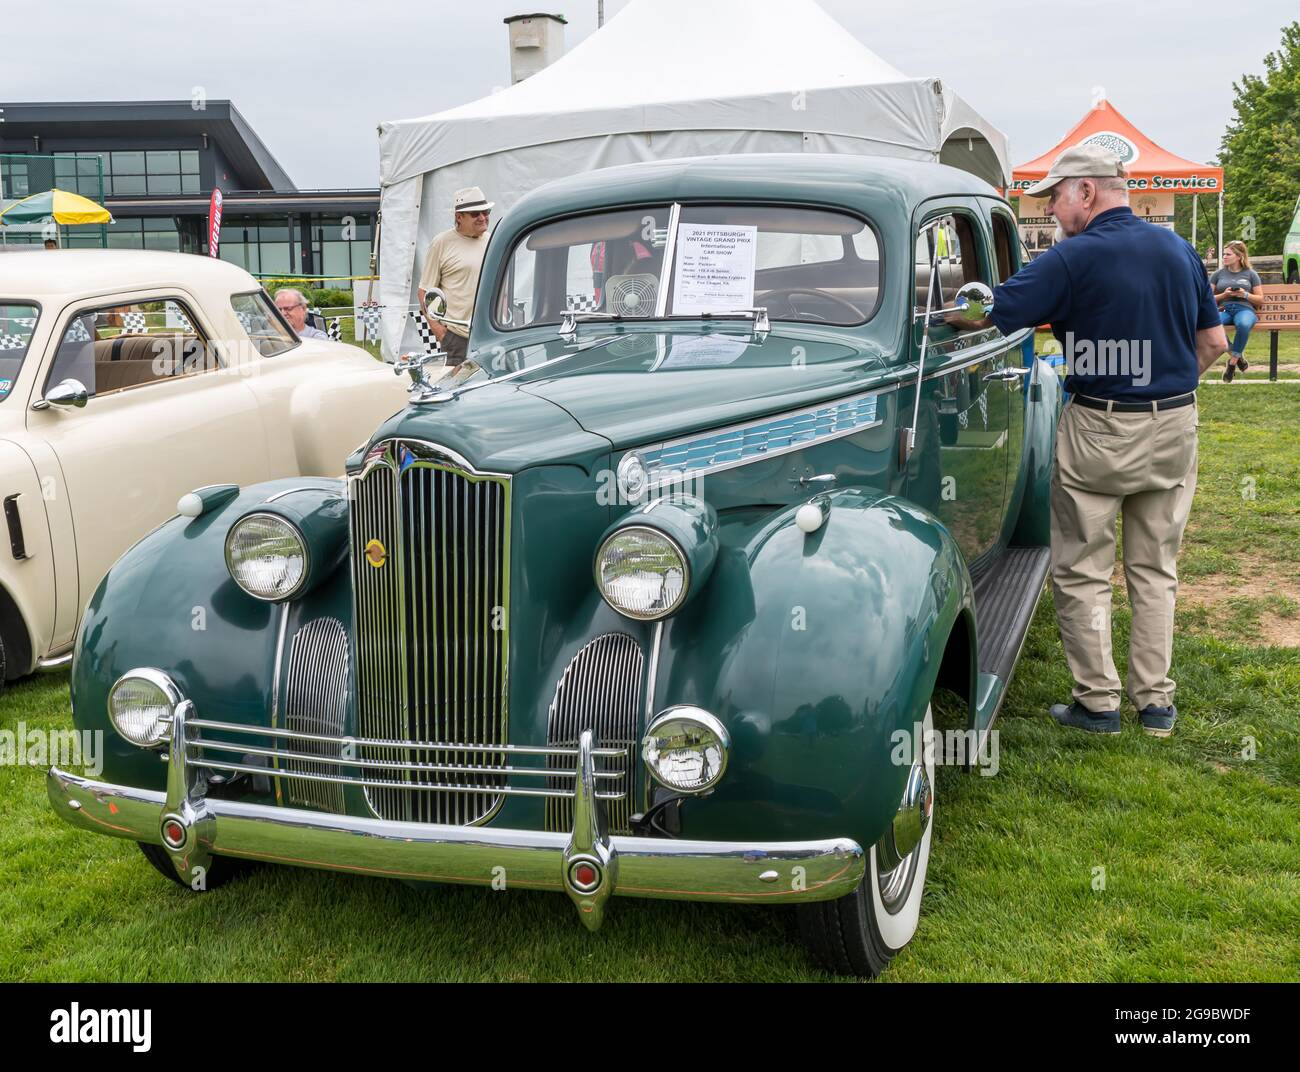 A 1940 green Packard on display at the Pittsburgh Vintage Grand Prix car show in Pittsburgh, Pennsylvania, USA Stock Photo